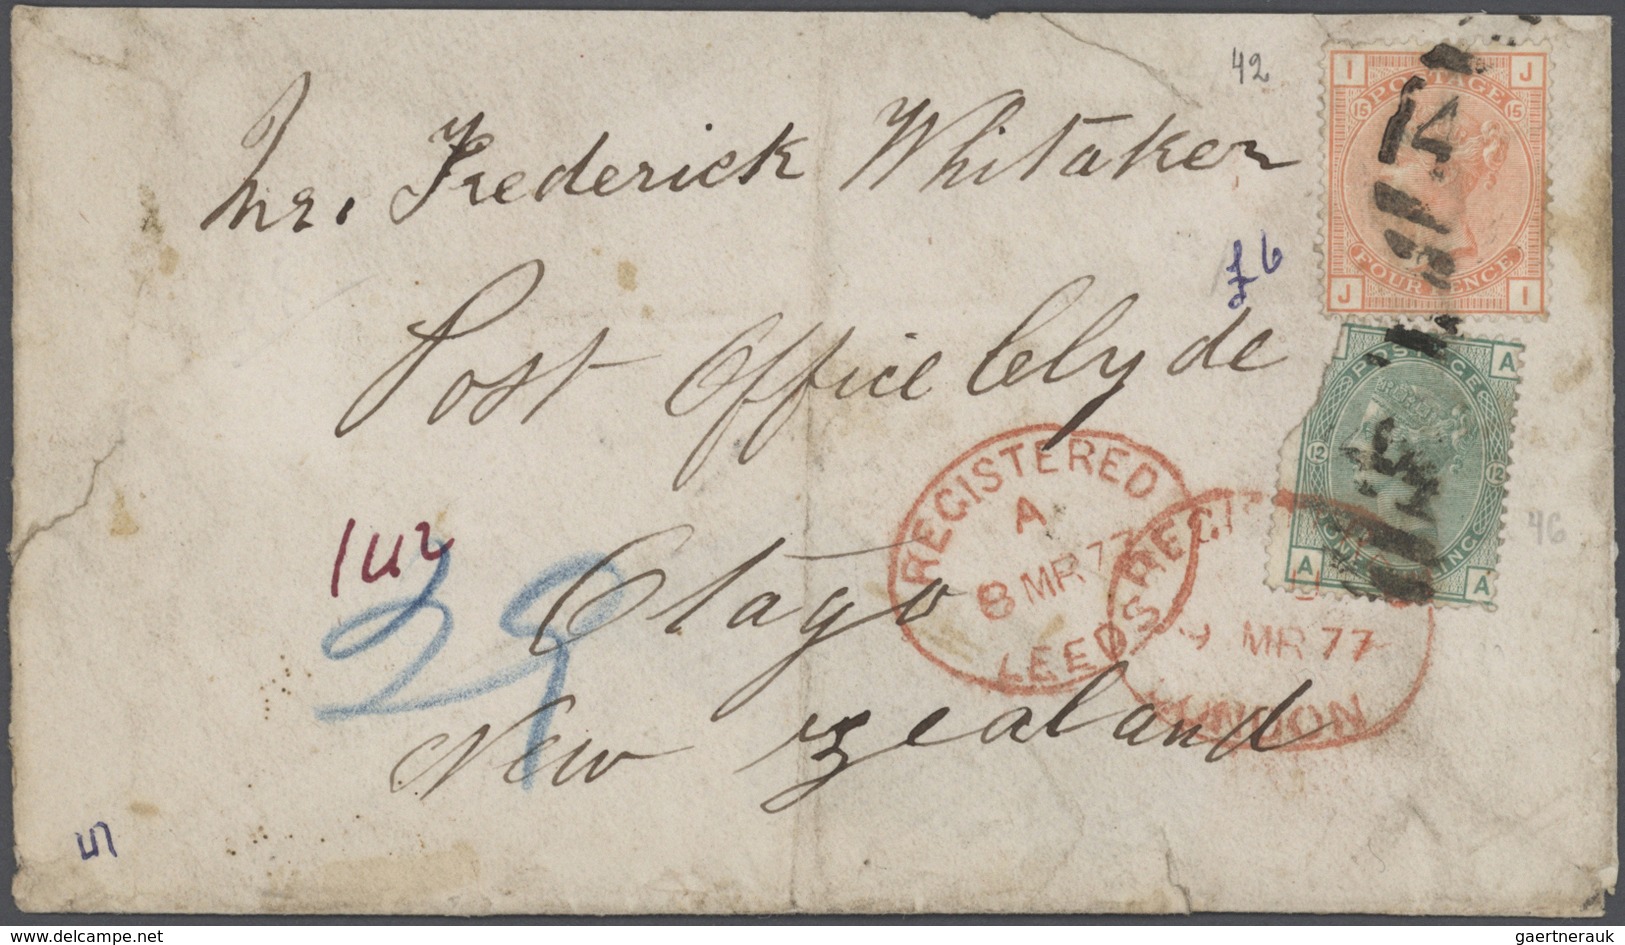 Großbritannien: 1840's-Modern: About 300-400 covers, postcards, postal stationery items etc., from f